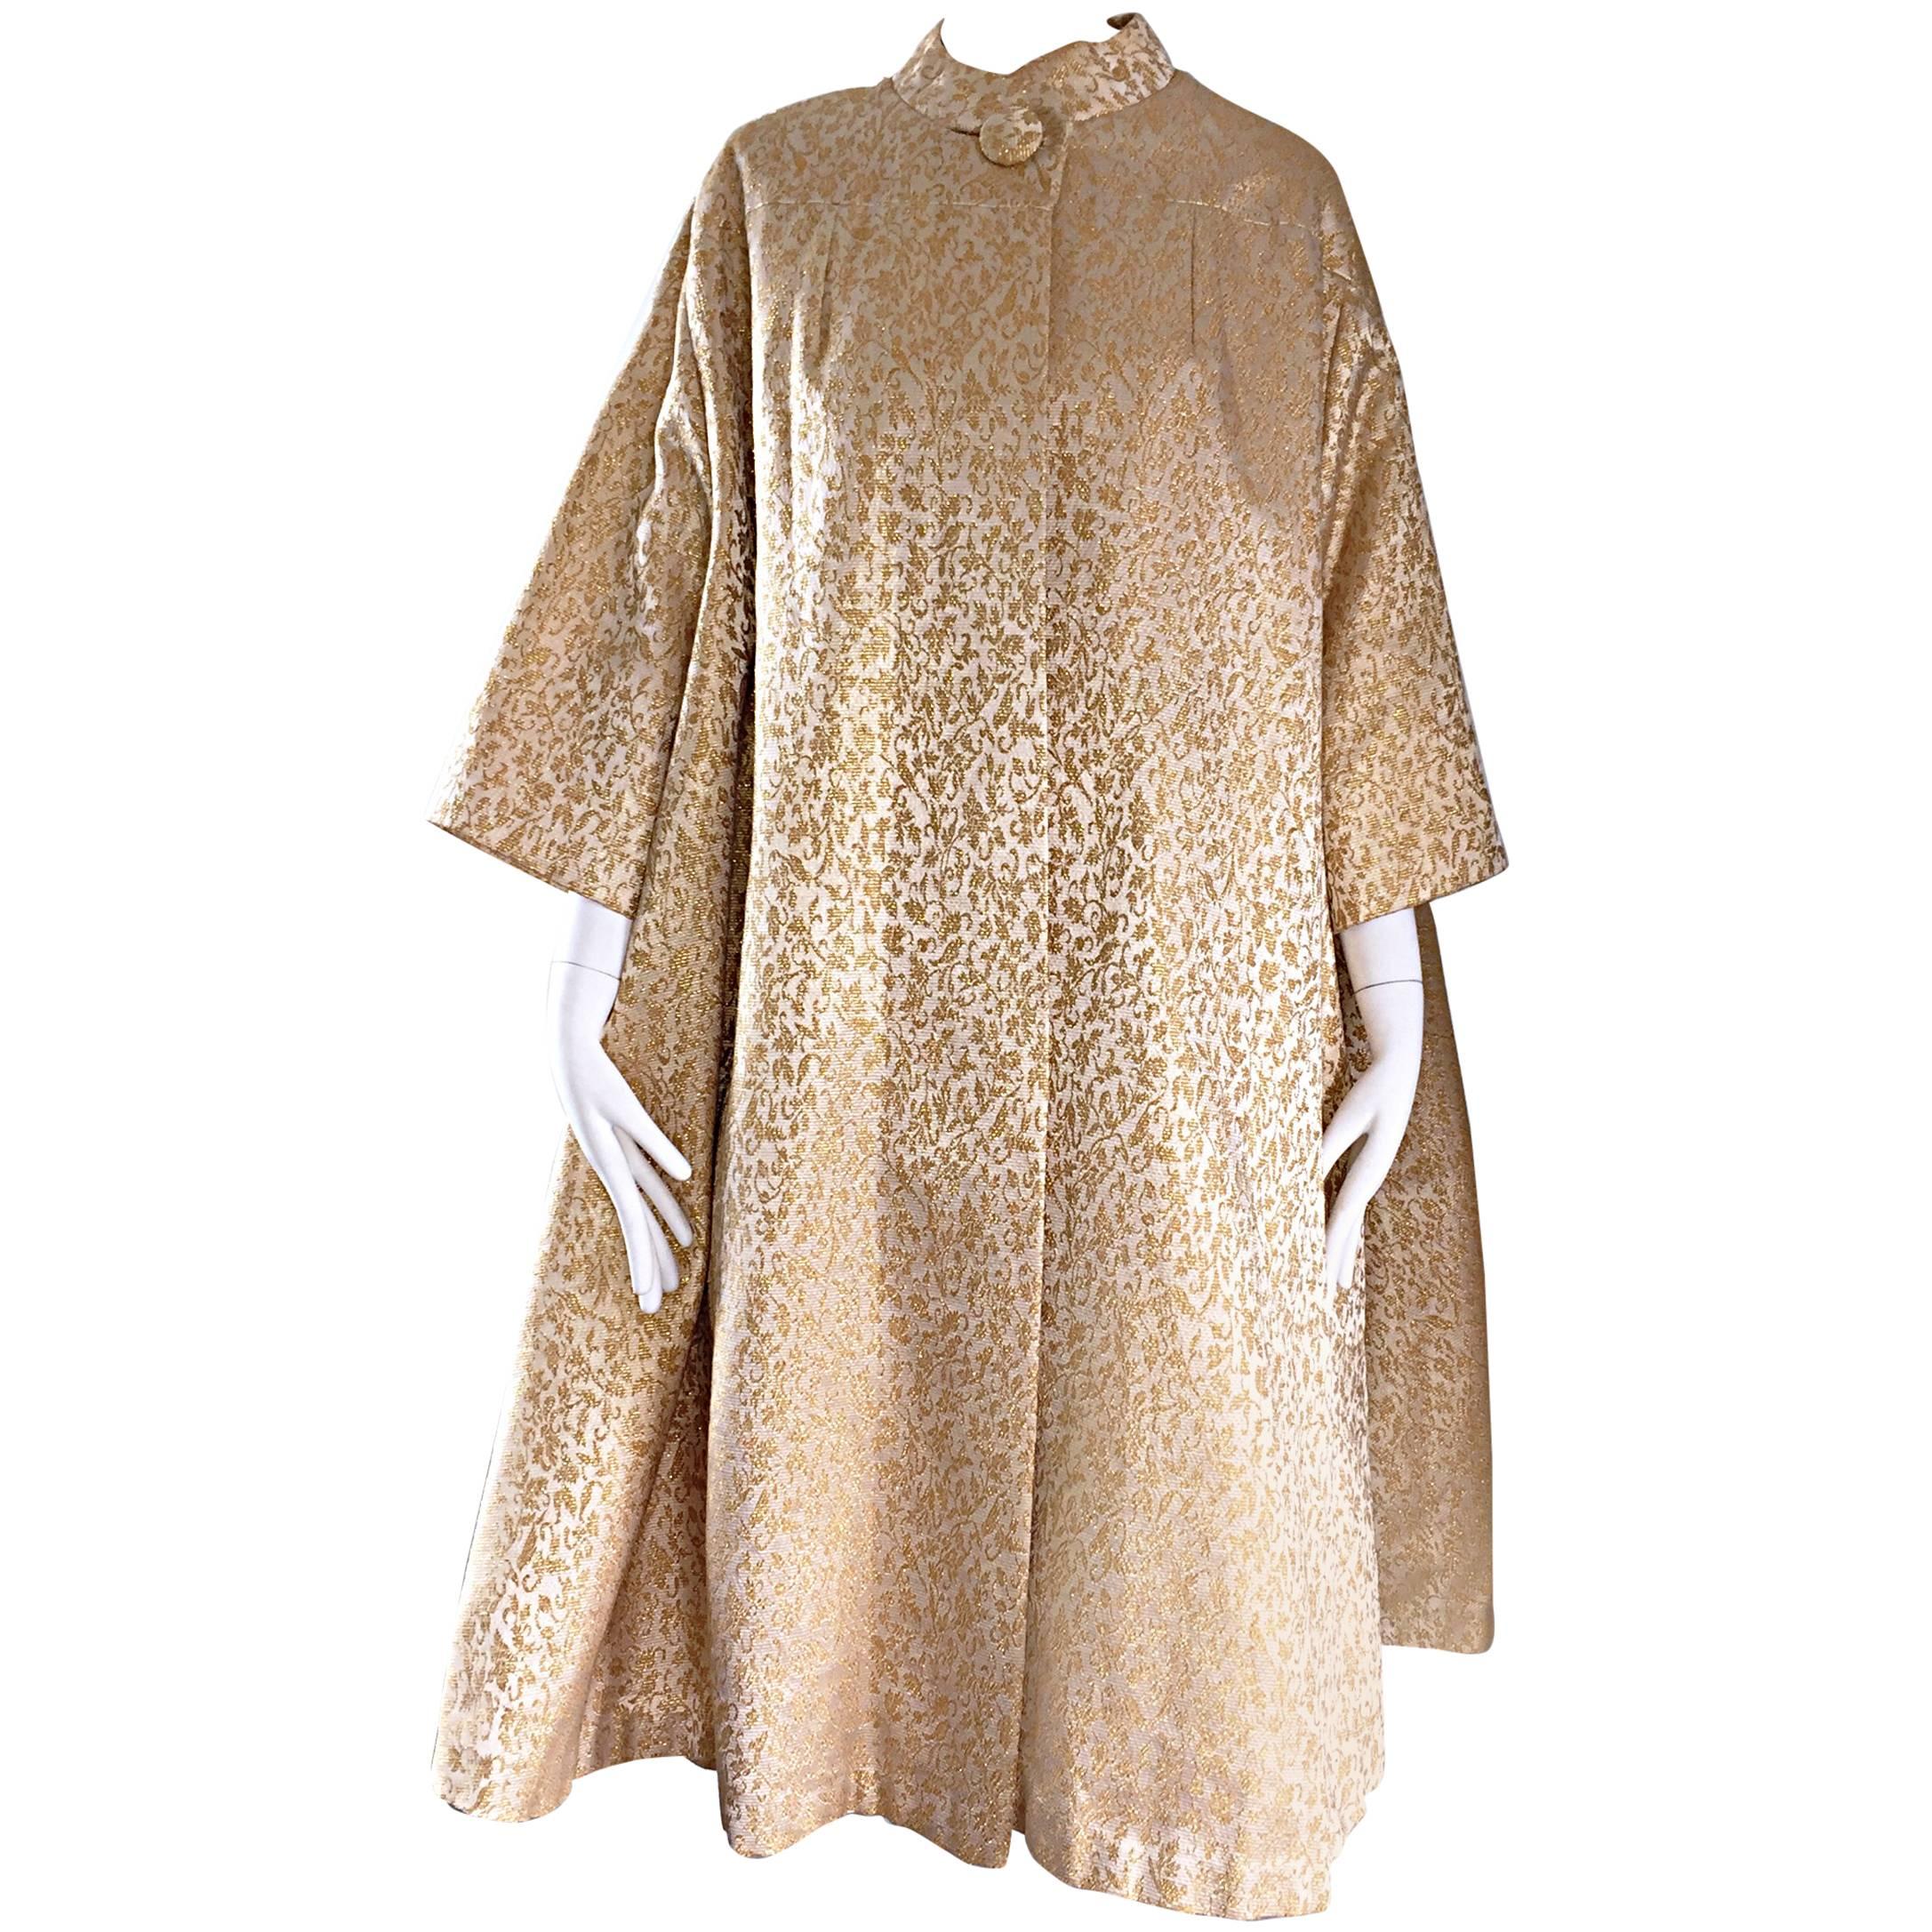 Spectacular Vintage 1950s Gold and Ivory Silk Brocade Opera Trapeze Jacket Coat